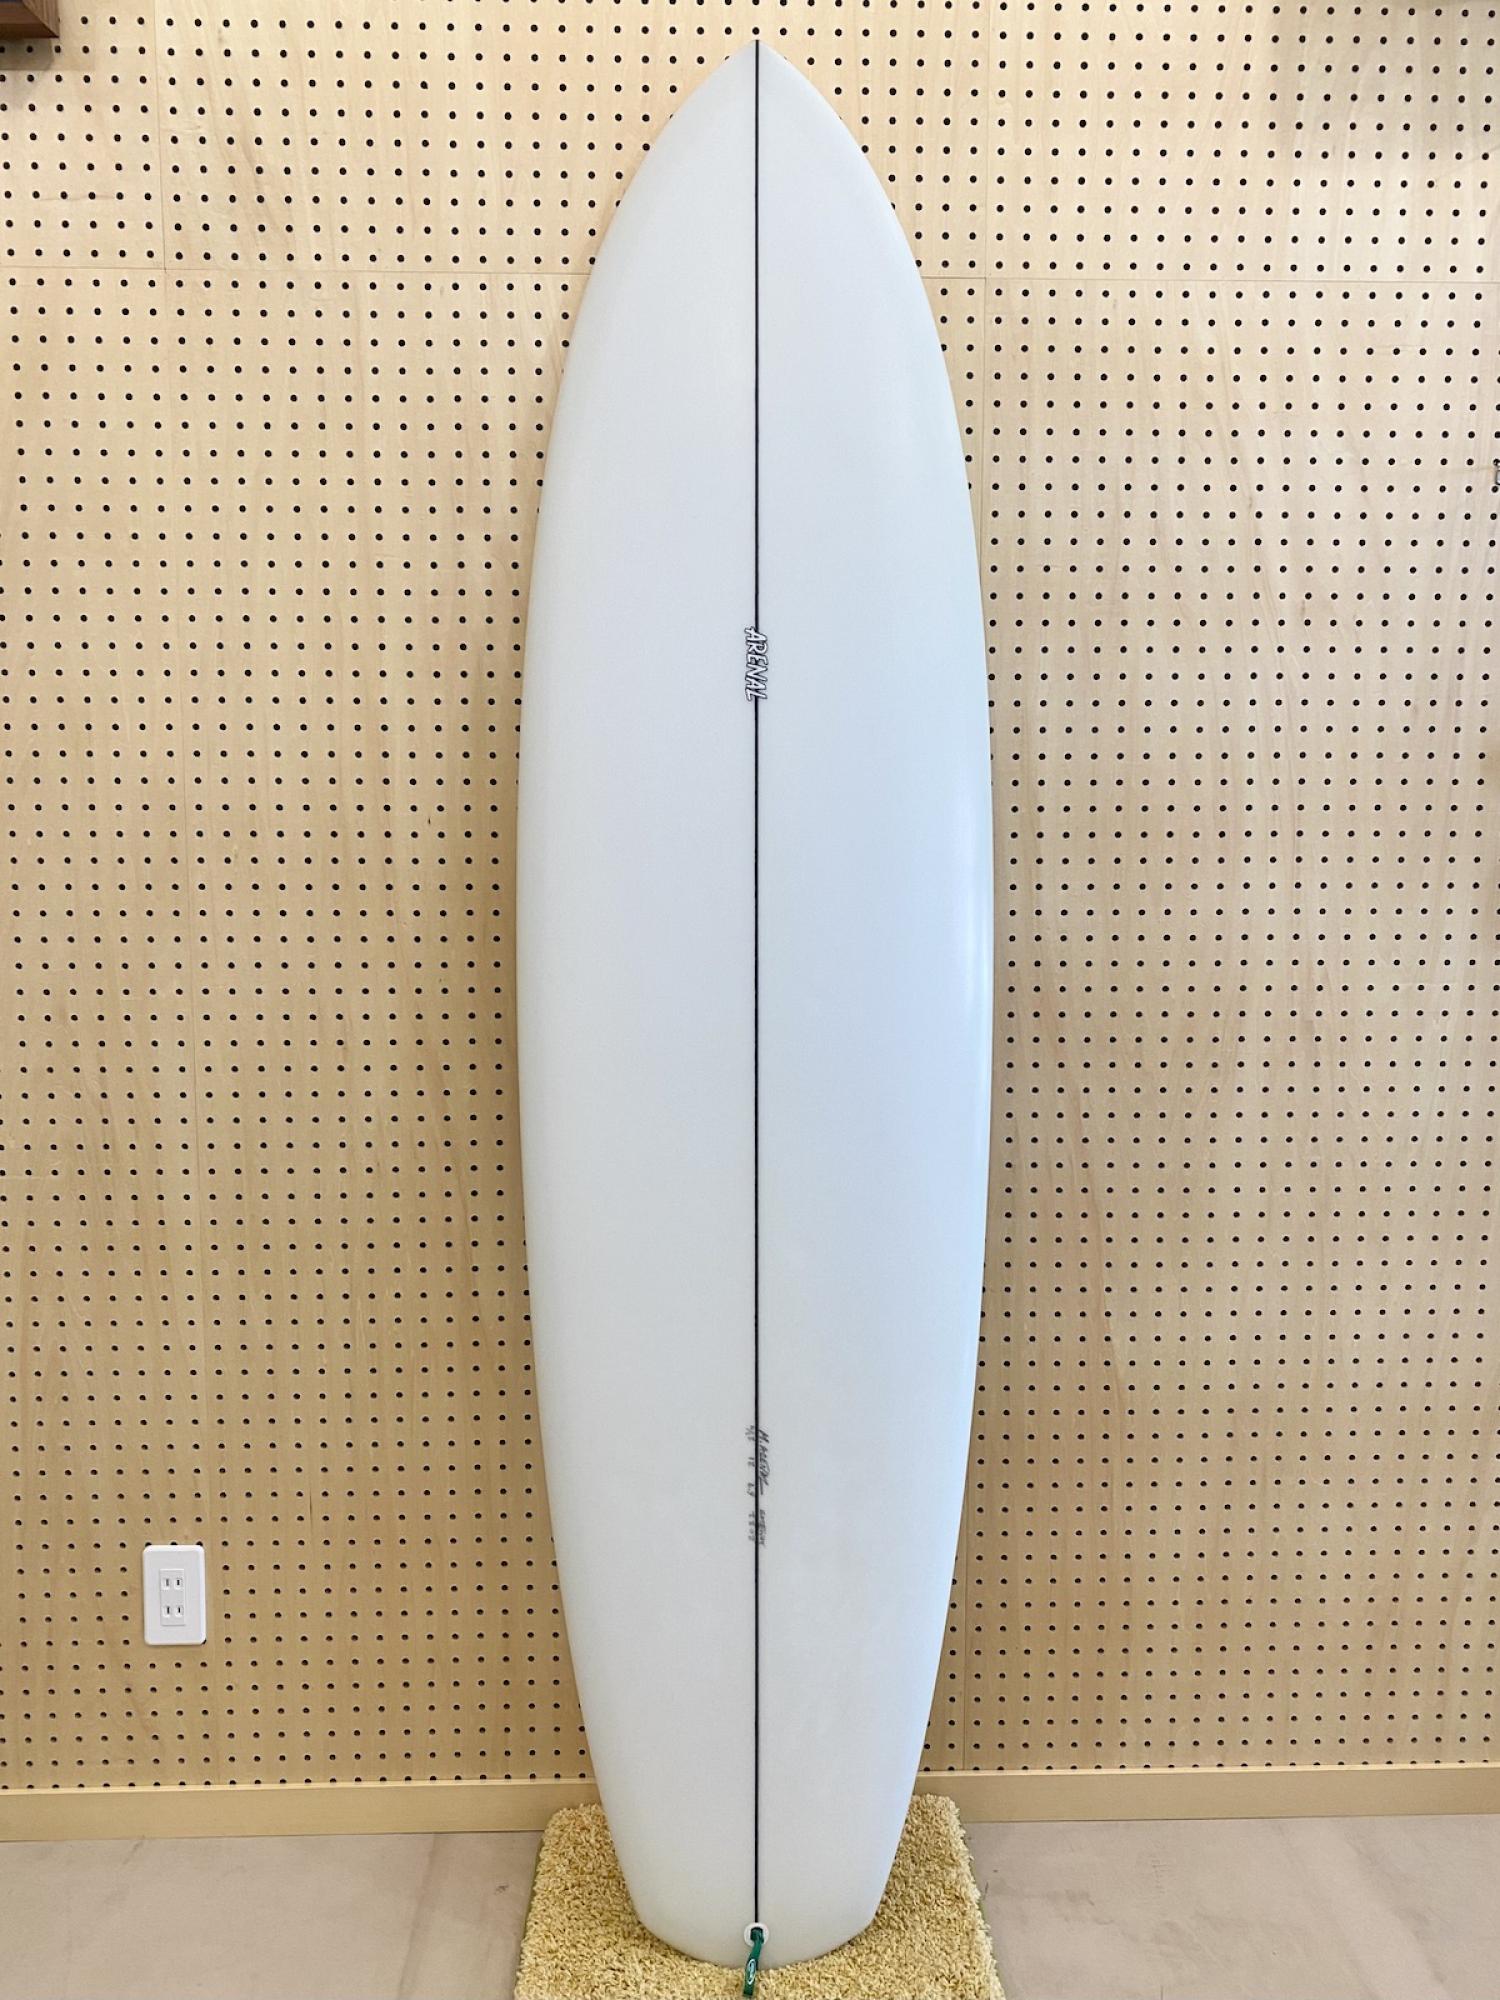 USED (6.9 Gateway Twin Arenal Surfboards)